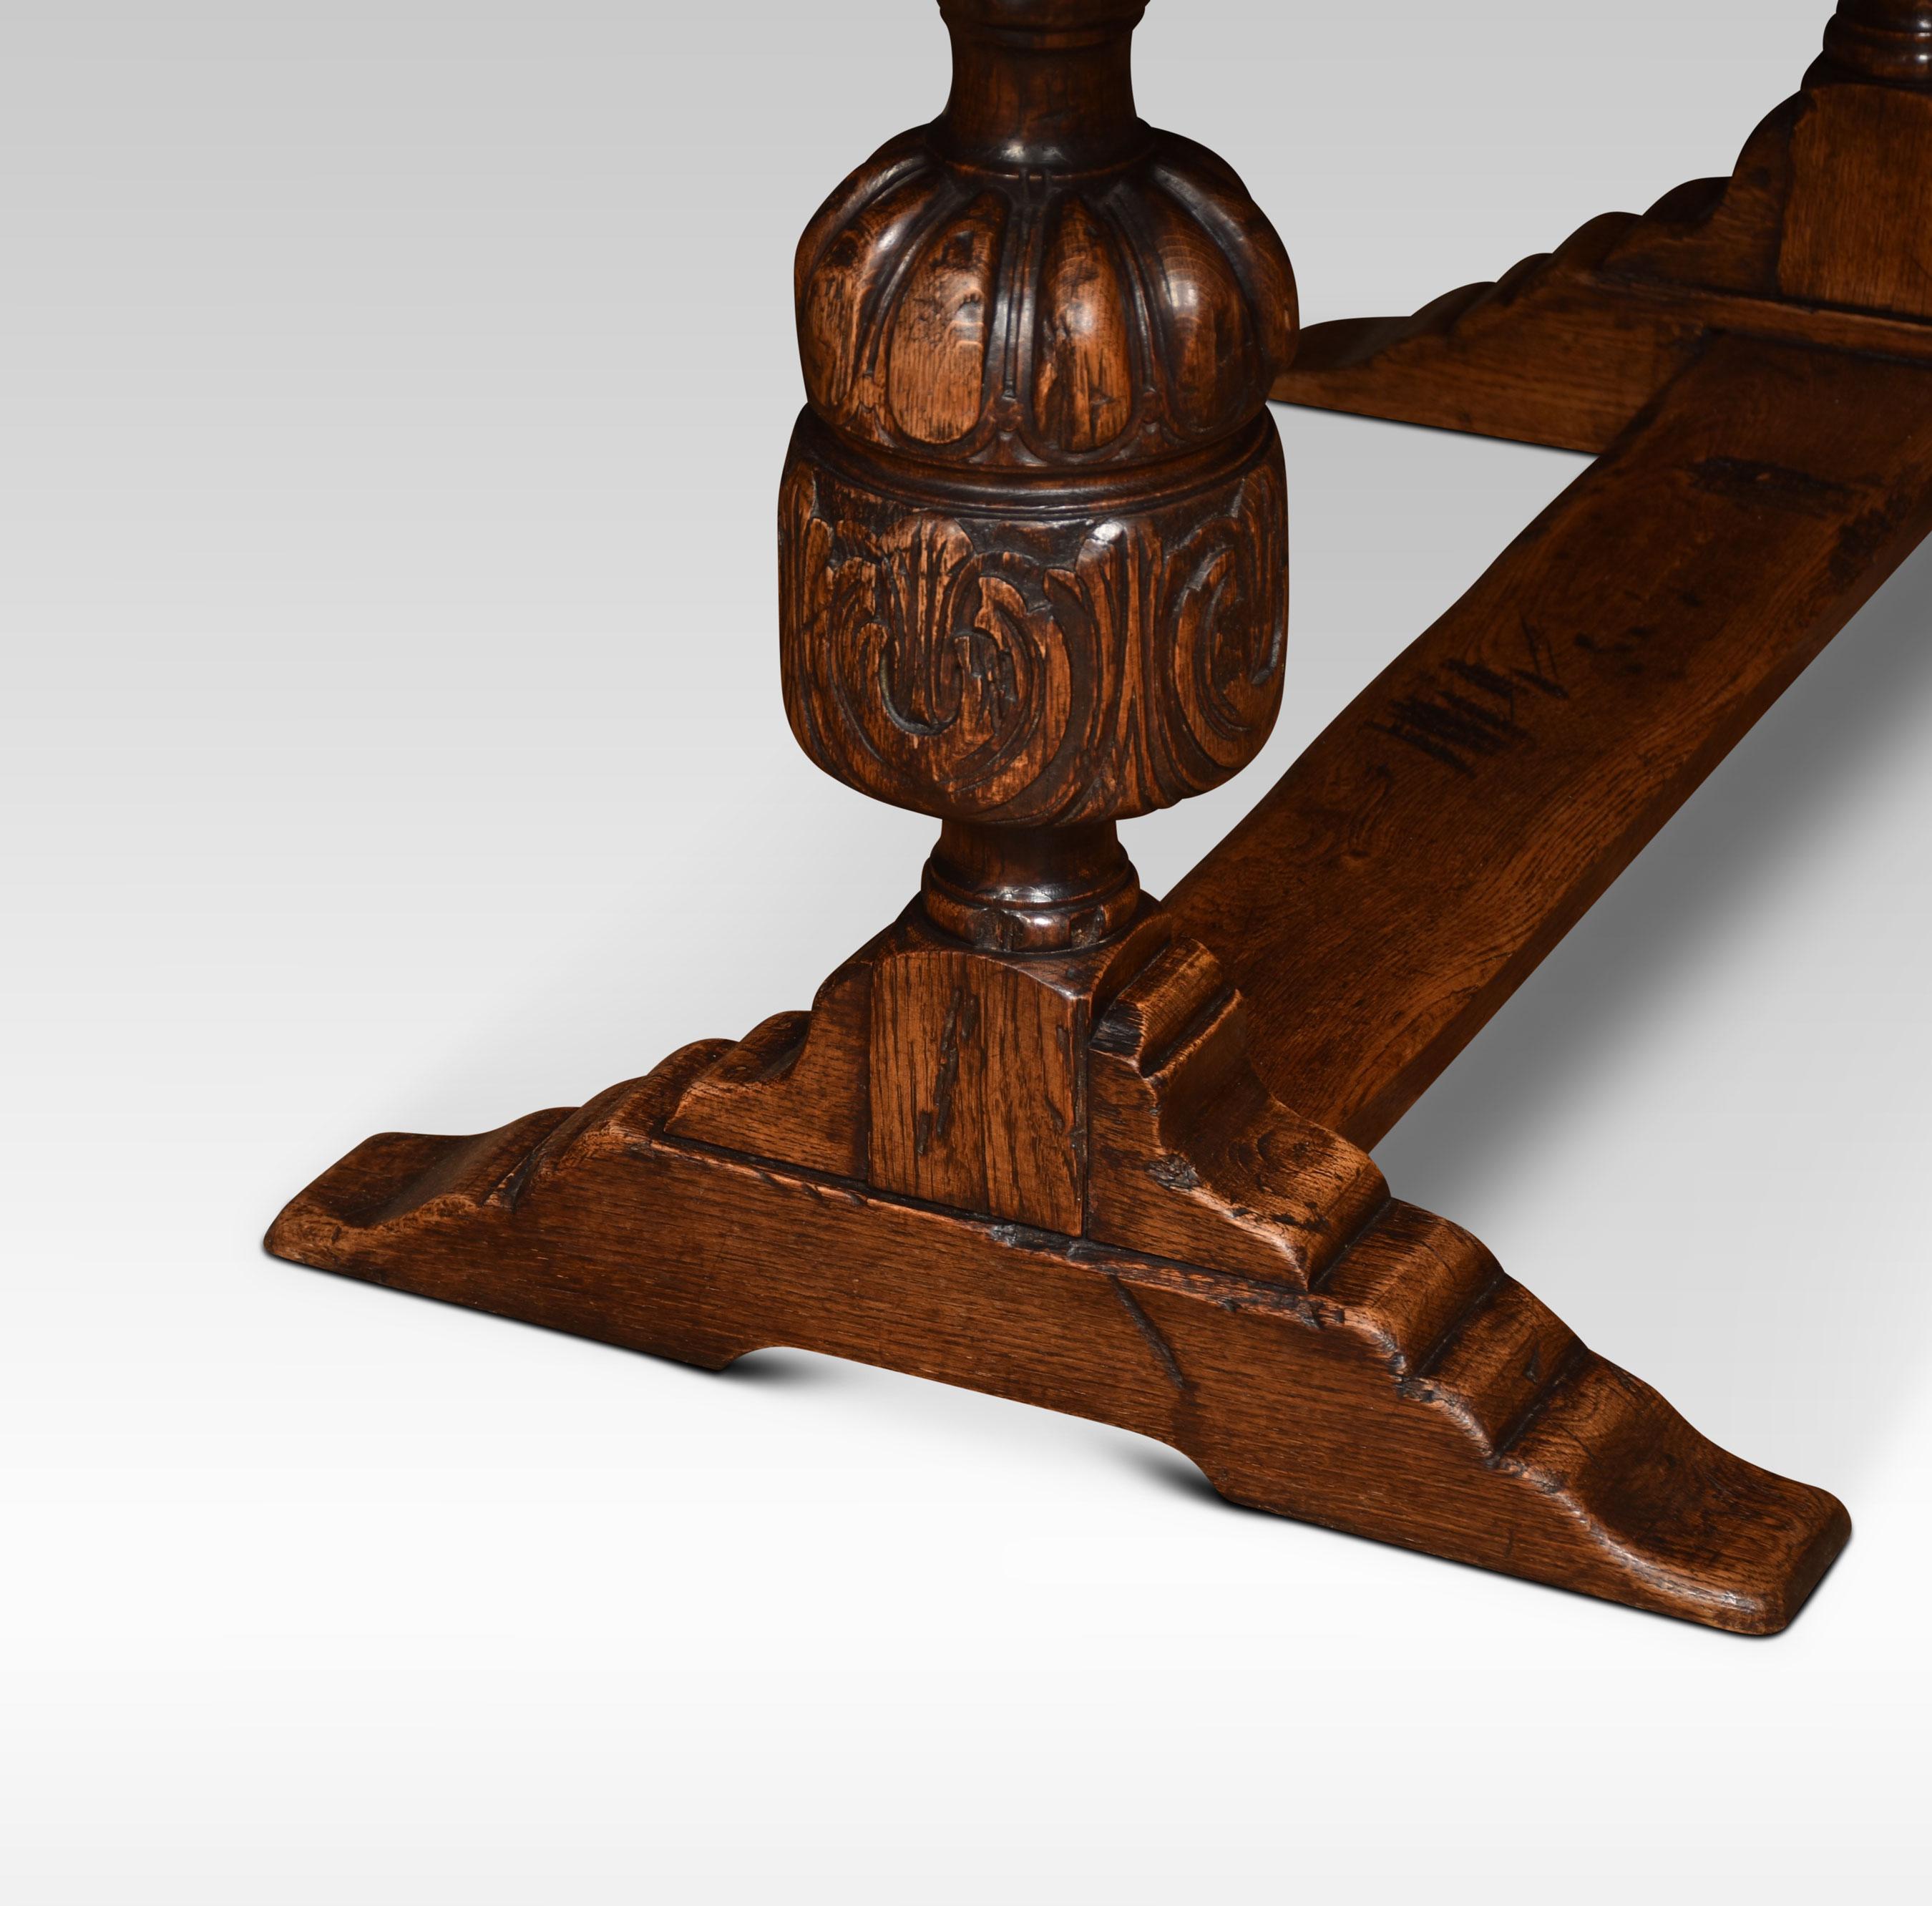 antique refectory table